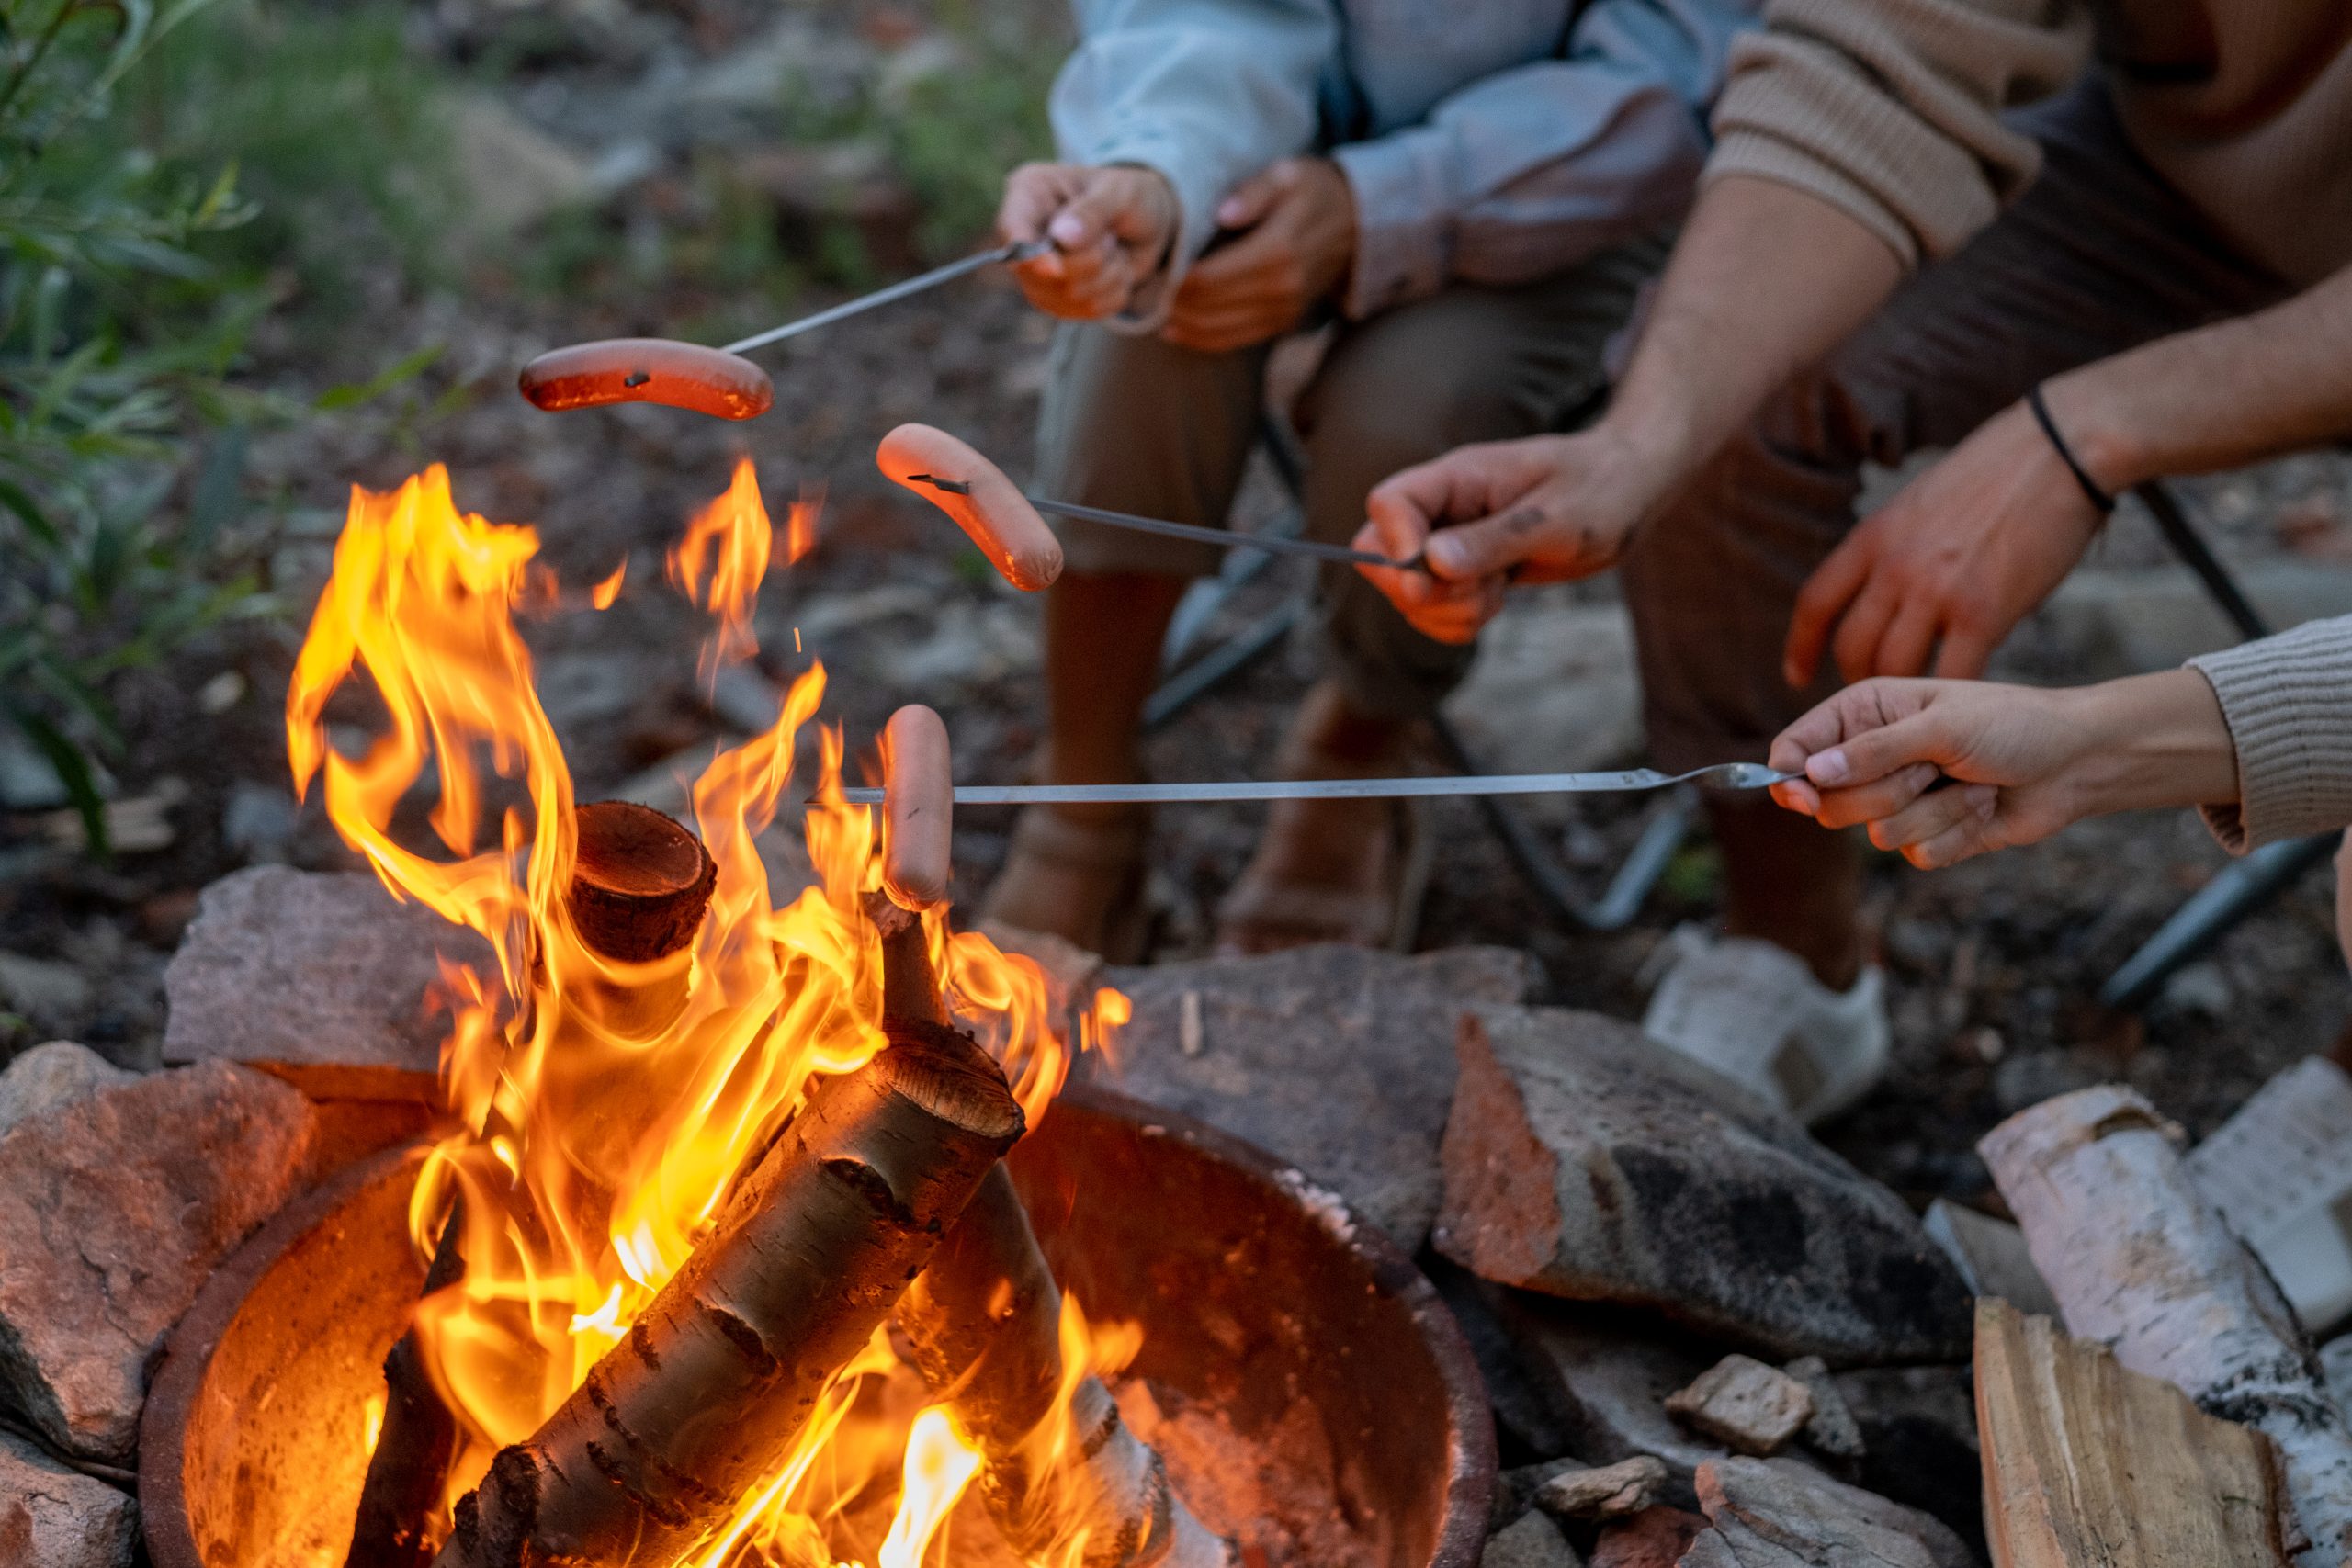 cooking hot dogs over a campfire